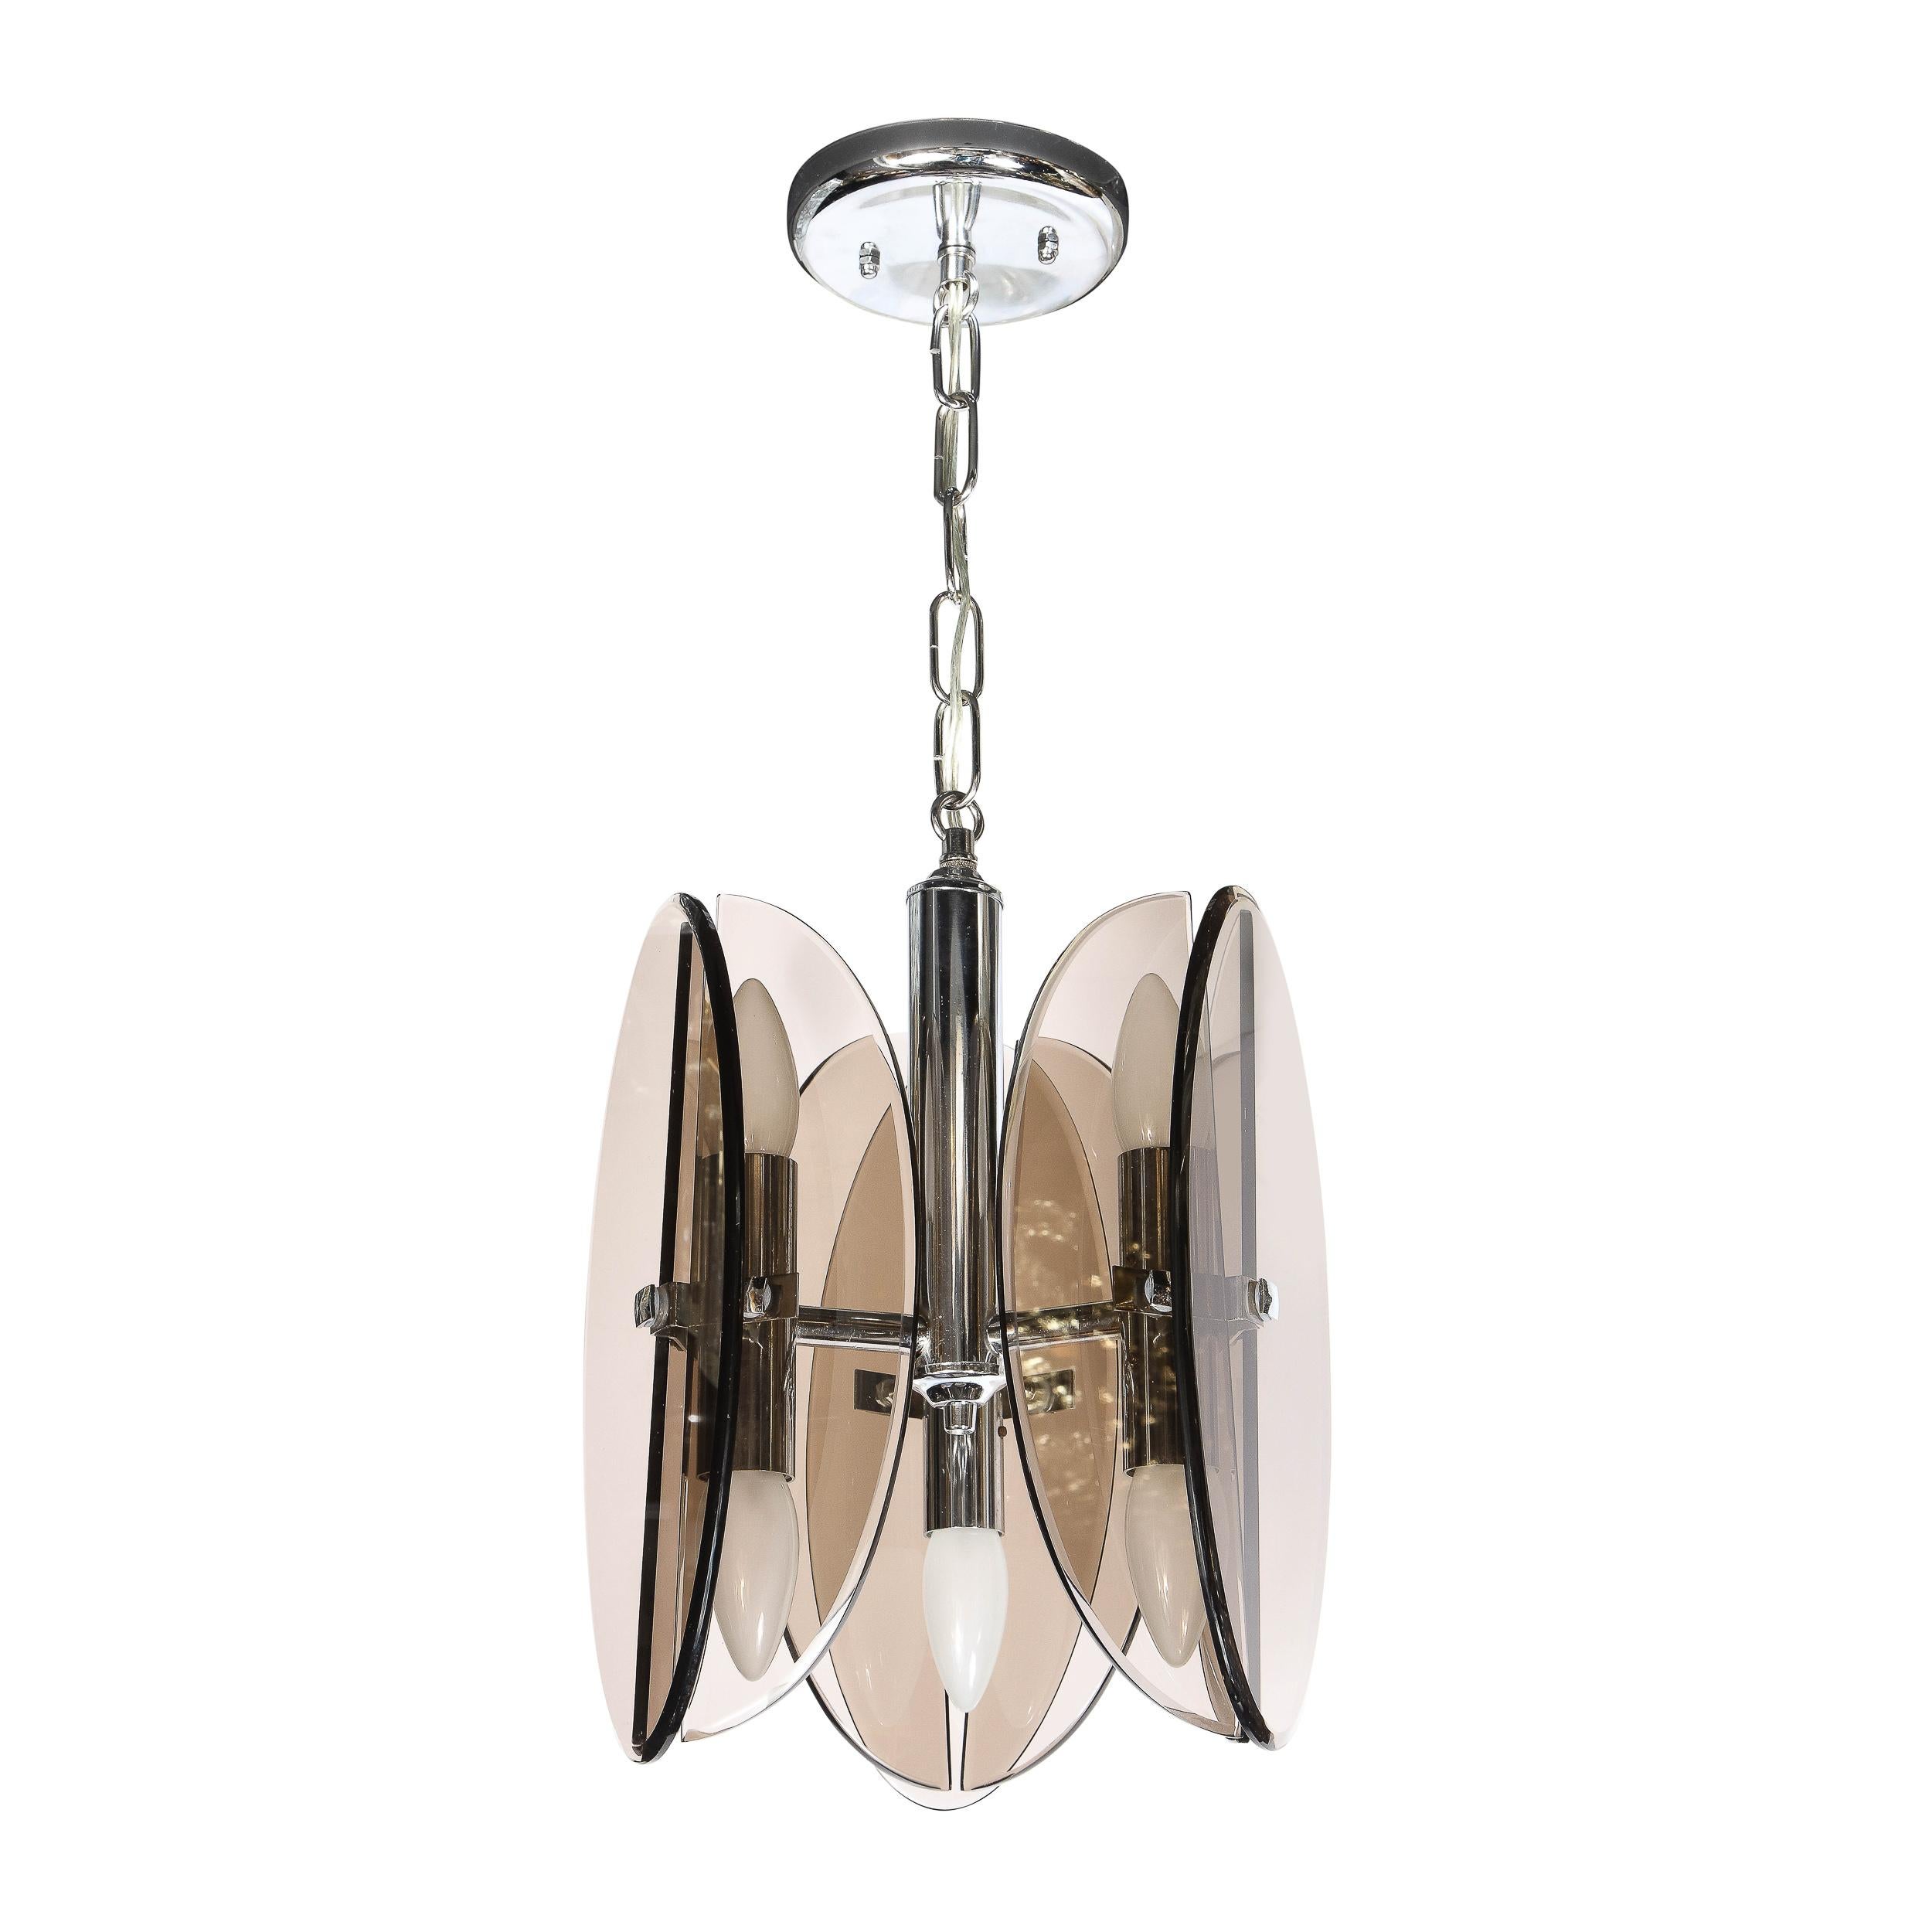 This stunning Mid-Century Modern pendant in the manner of Fontana Arte in Italy, circa 1960. It features a cylindrical body with a contracting conical top threaded with chain that connects to a circular canopy- all in lustrous chrome. Three arms